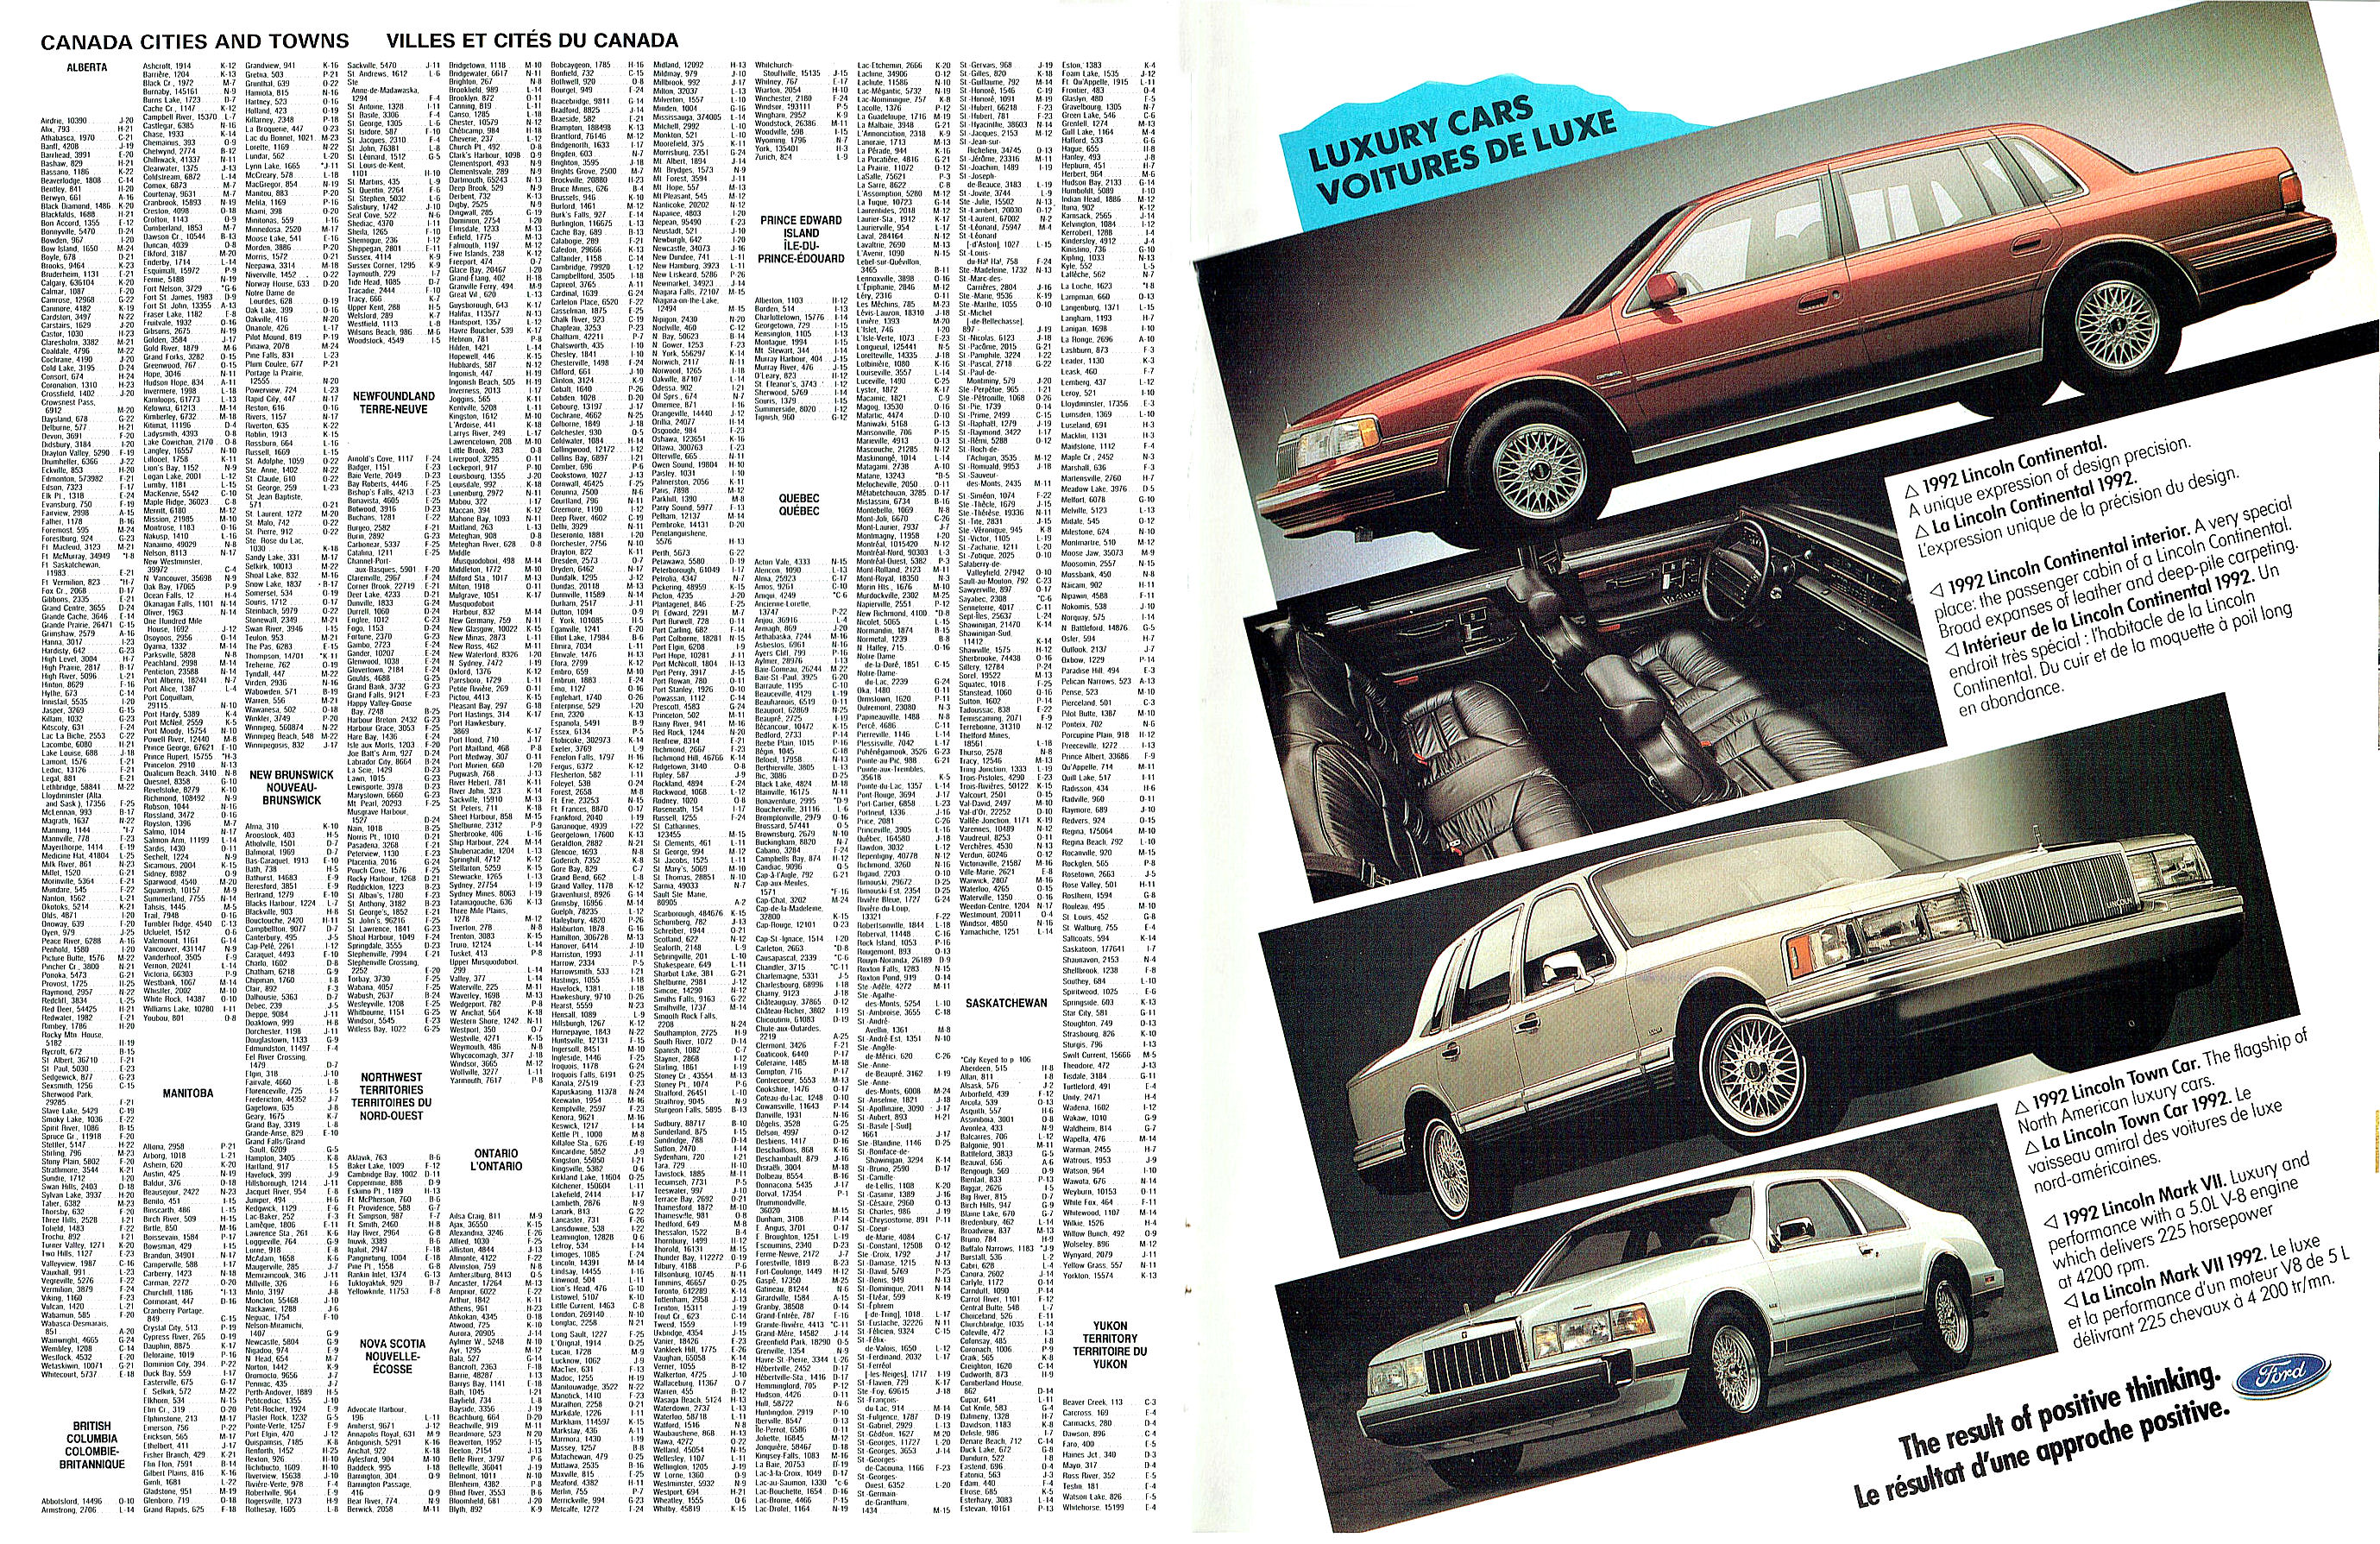 1992_Ford_Canada_Road_Atlas__Guide-32-33